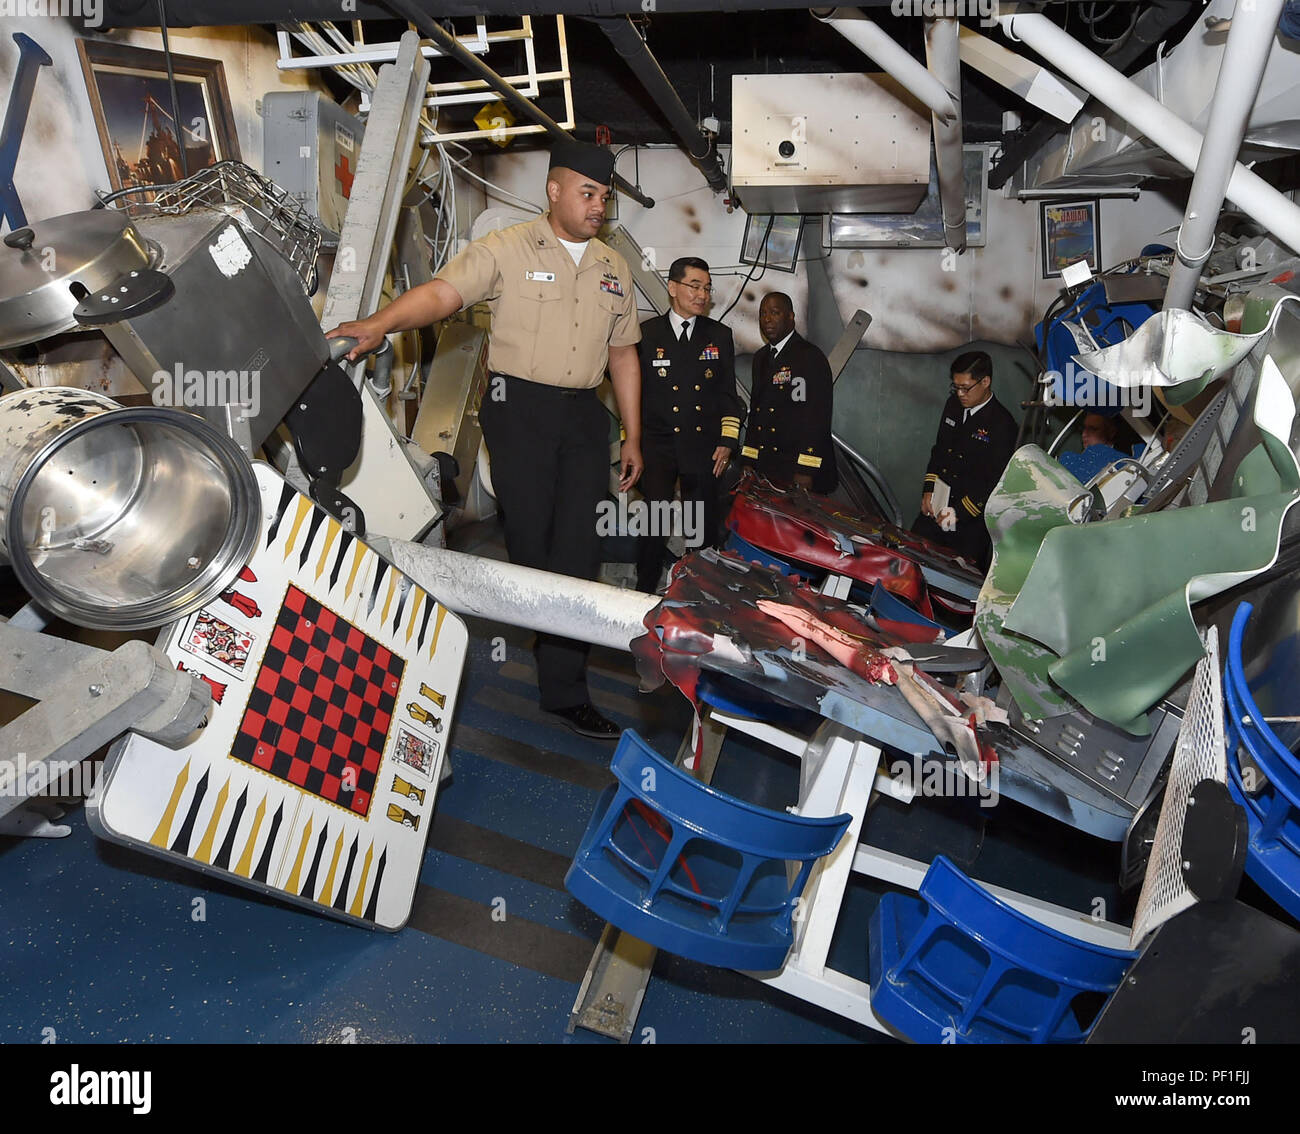 GREAT LAKES, Ill. (February 29, 2016) – Information Systems Technician 1st  Class, Battle Stations 21 Leading Petty Officer, escorts Vice Adm. Jin-Sup  Jung, Republic of Korea (ROK) Navy's commander of Naval Education